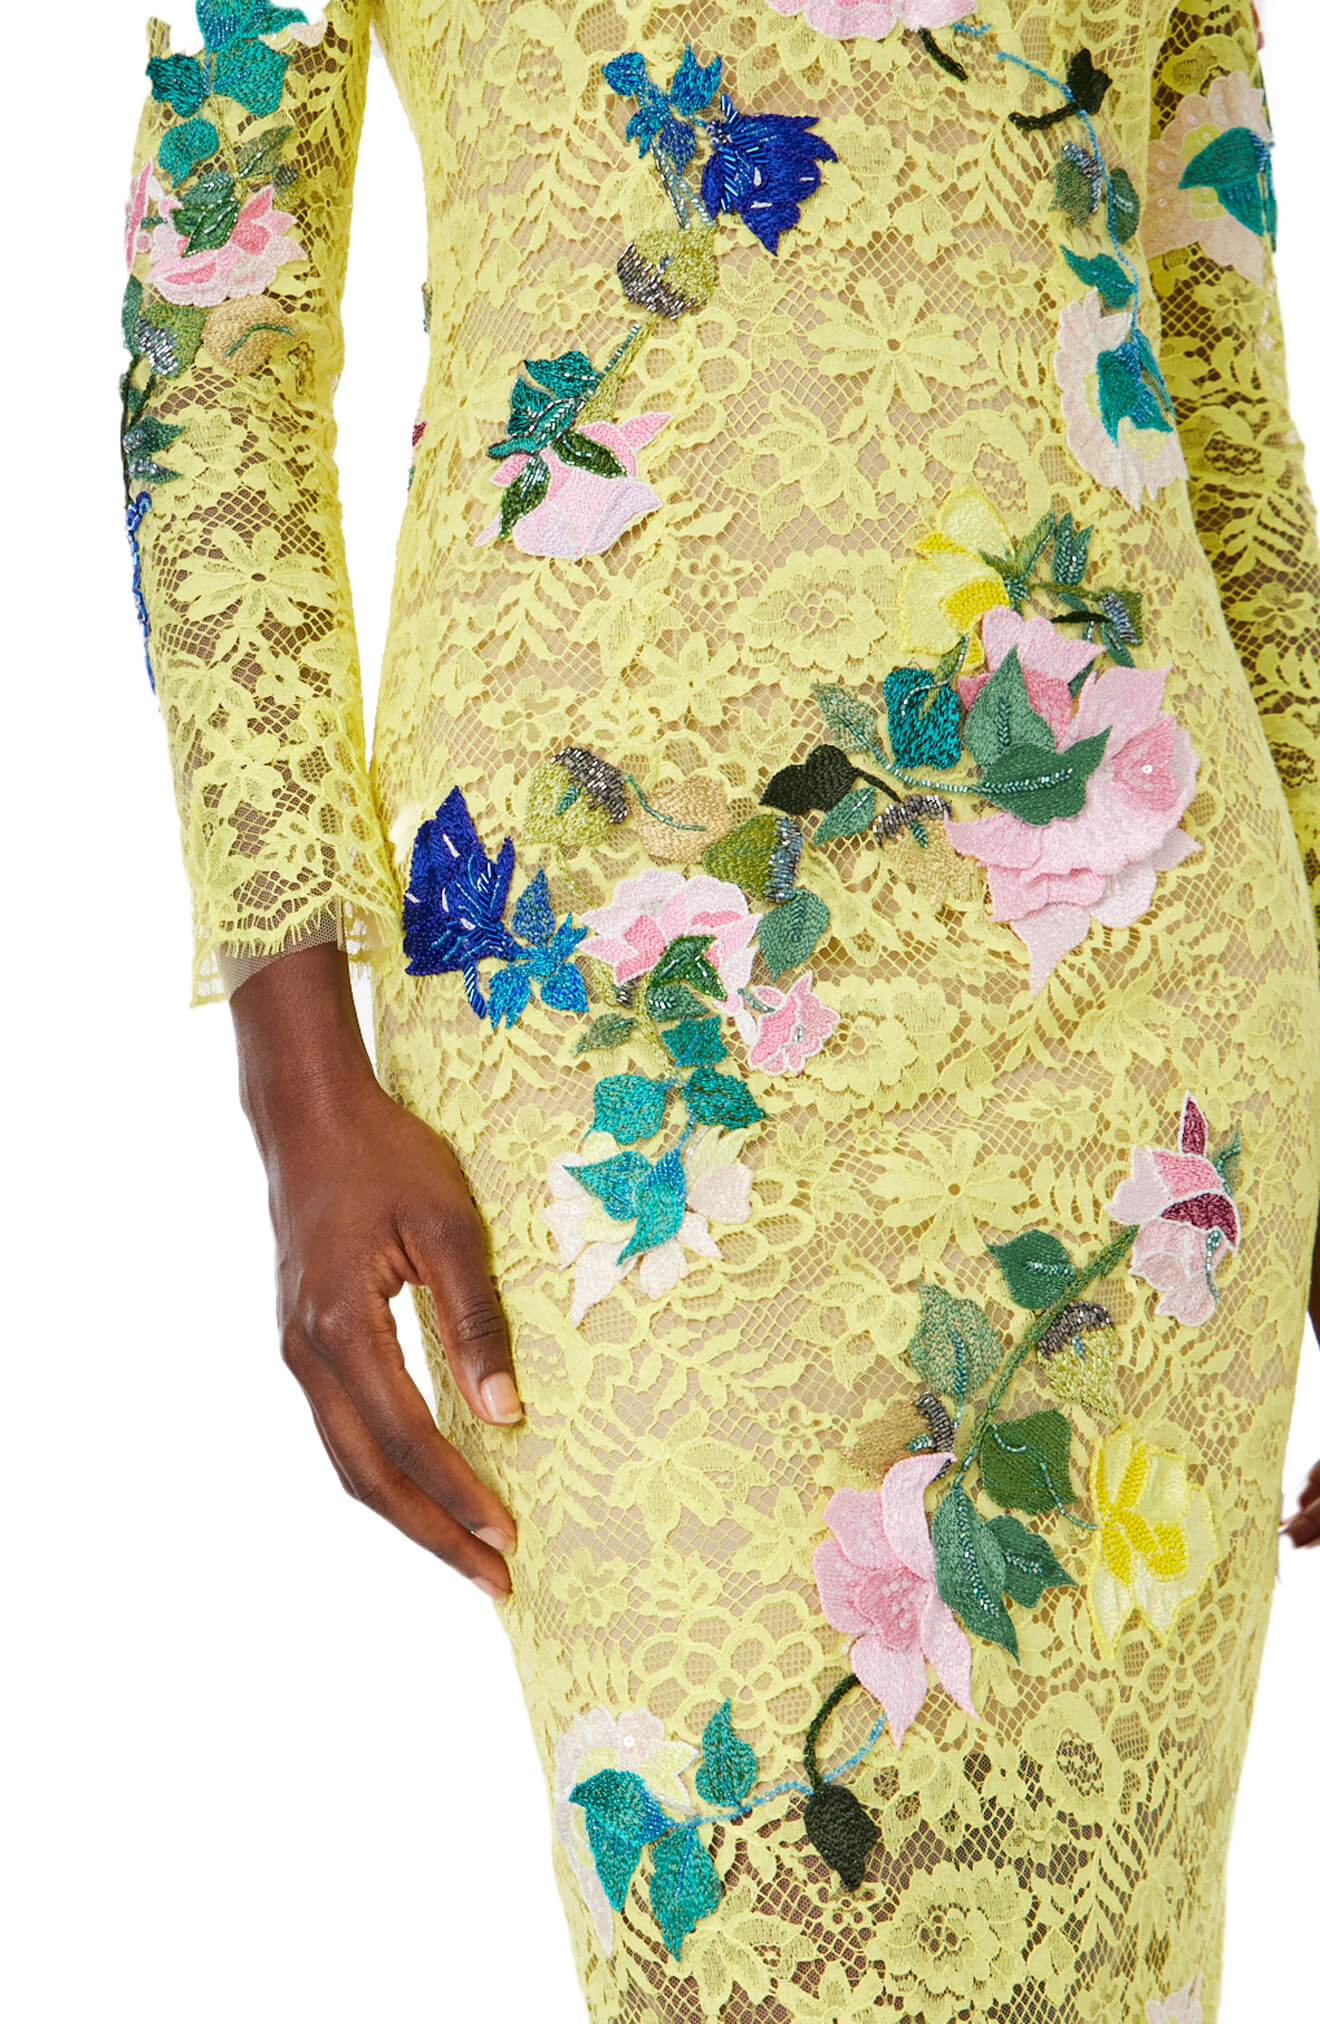 Monique Lhuillier Spring 2024 long sleeve yellow lace midi dress with floral embroidery - close up two.